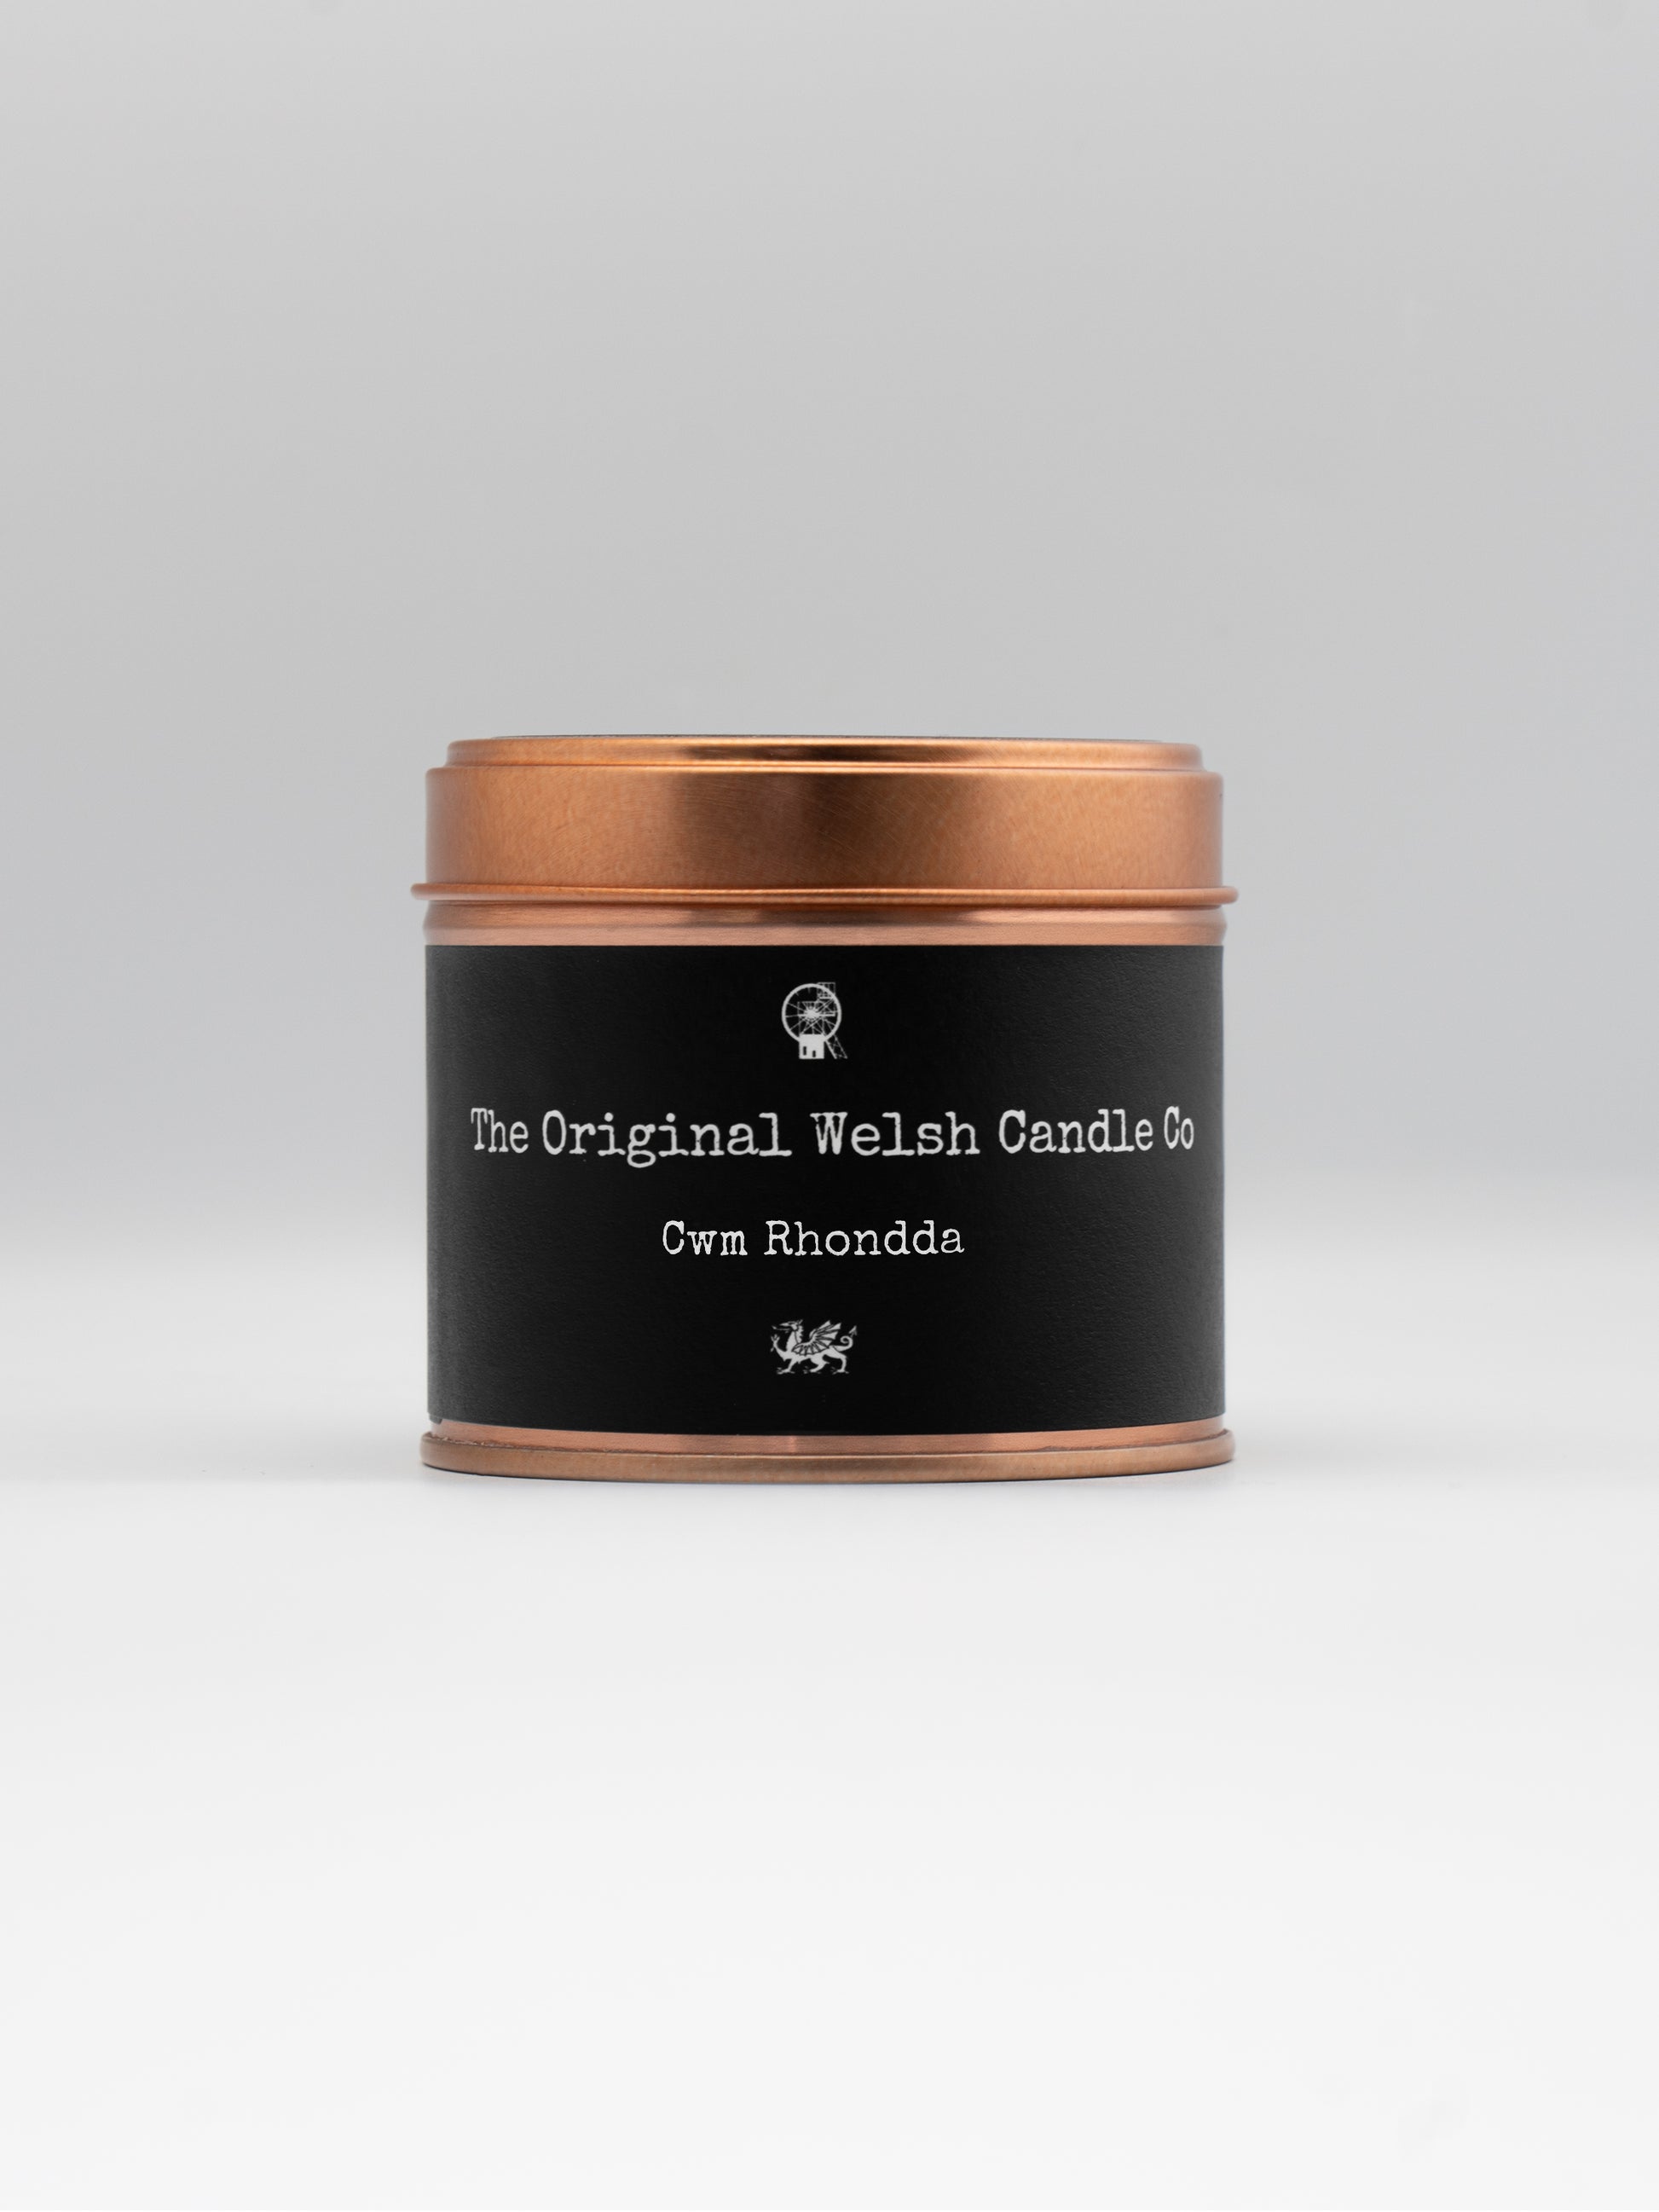 Lovely copper tin with black label very classy filled with a fresh linen soy wax